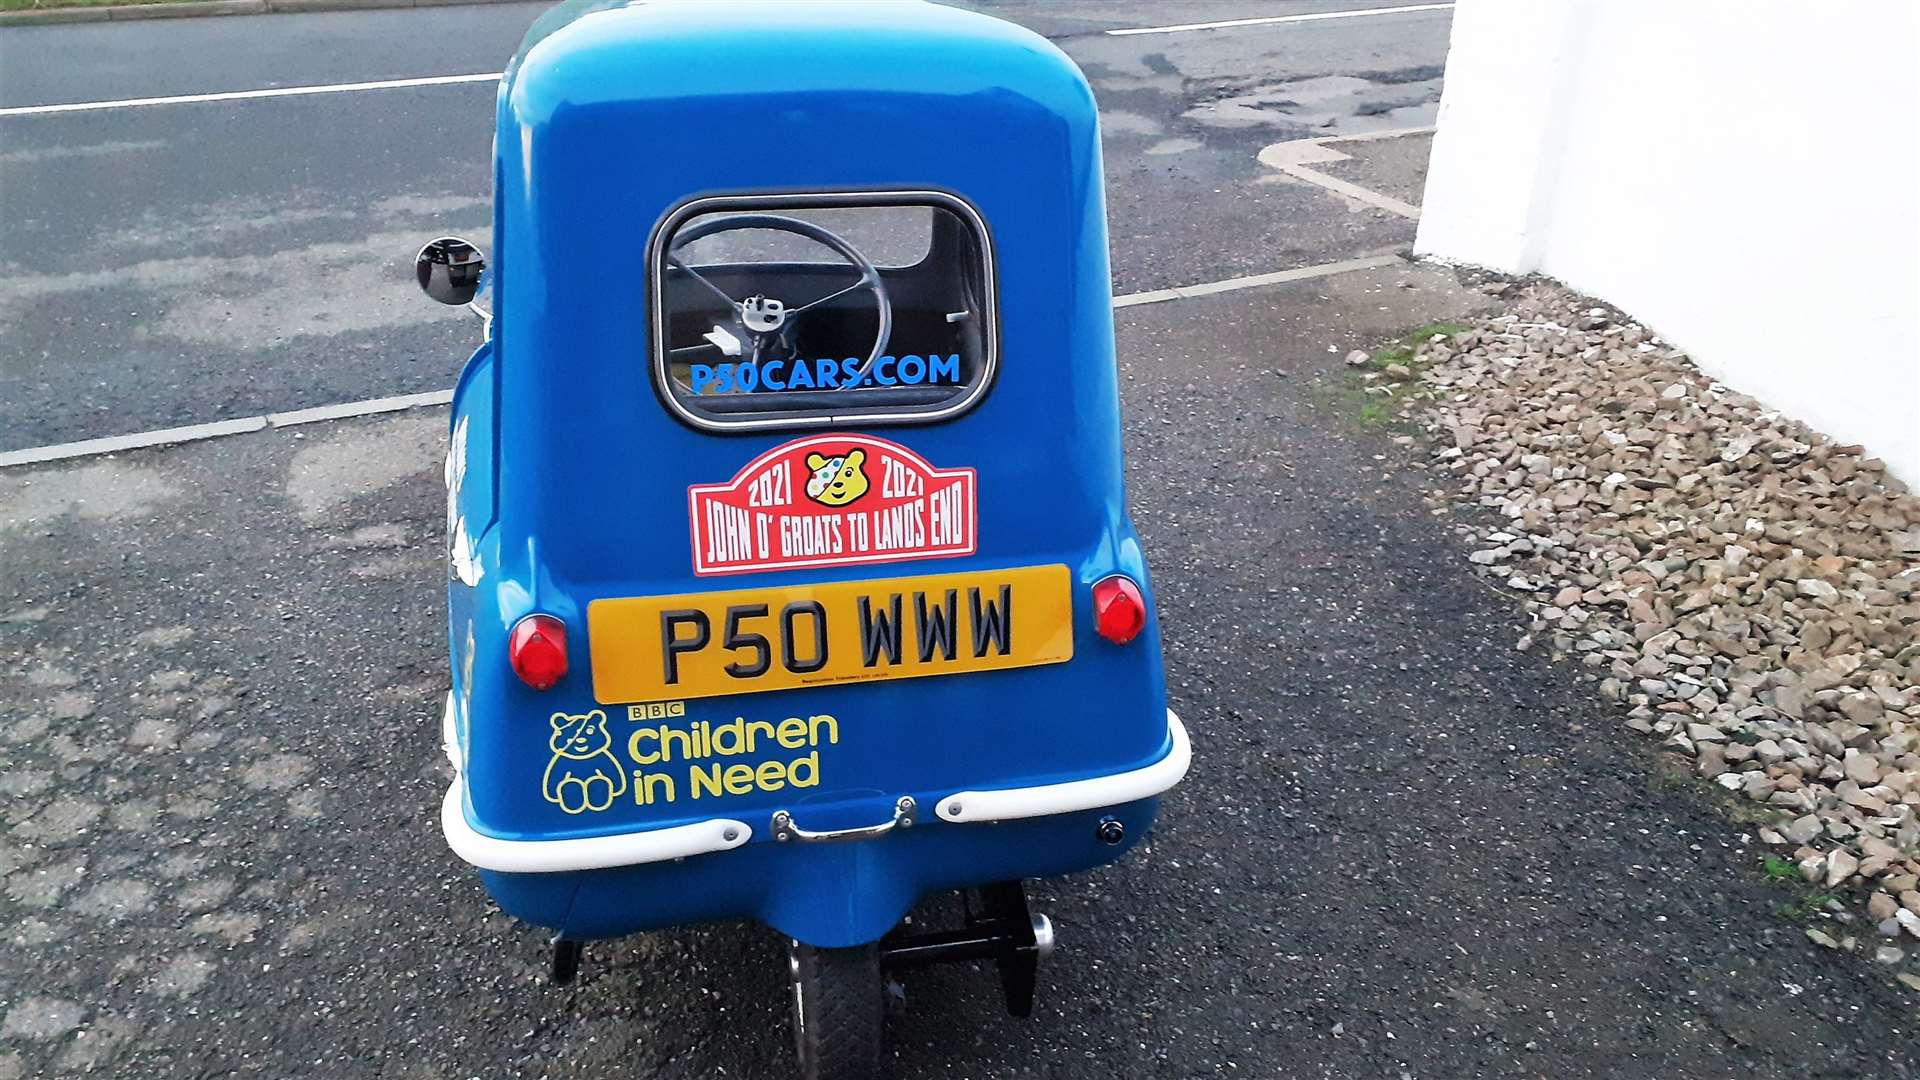 The Peel P50 has a top speed of 35mph and is powered by a moped engine.